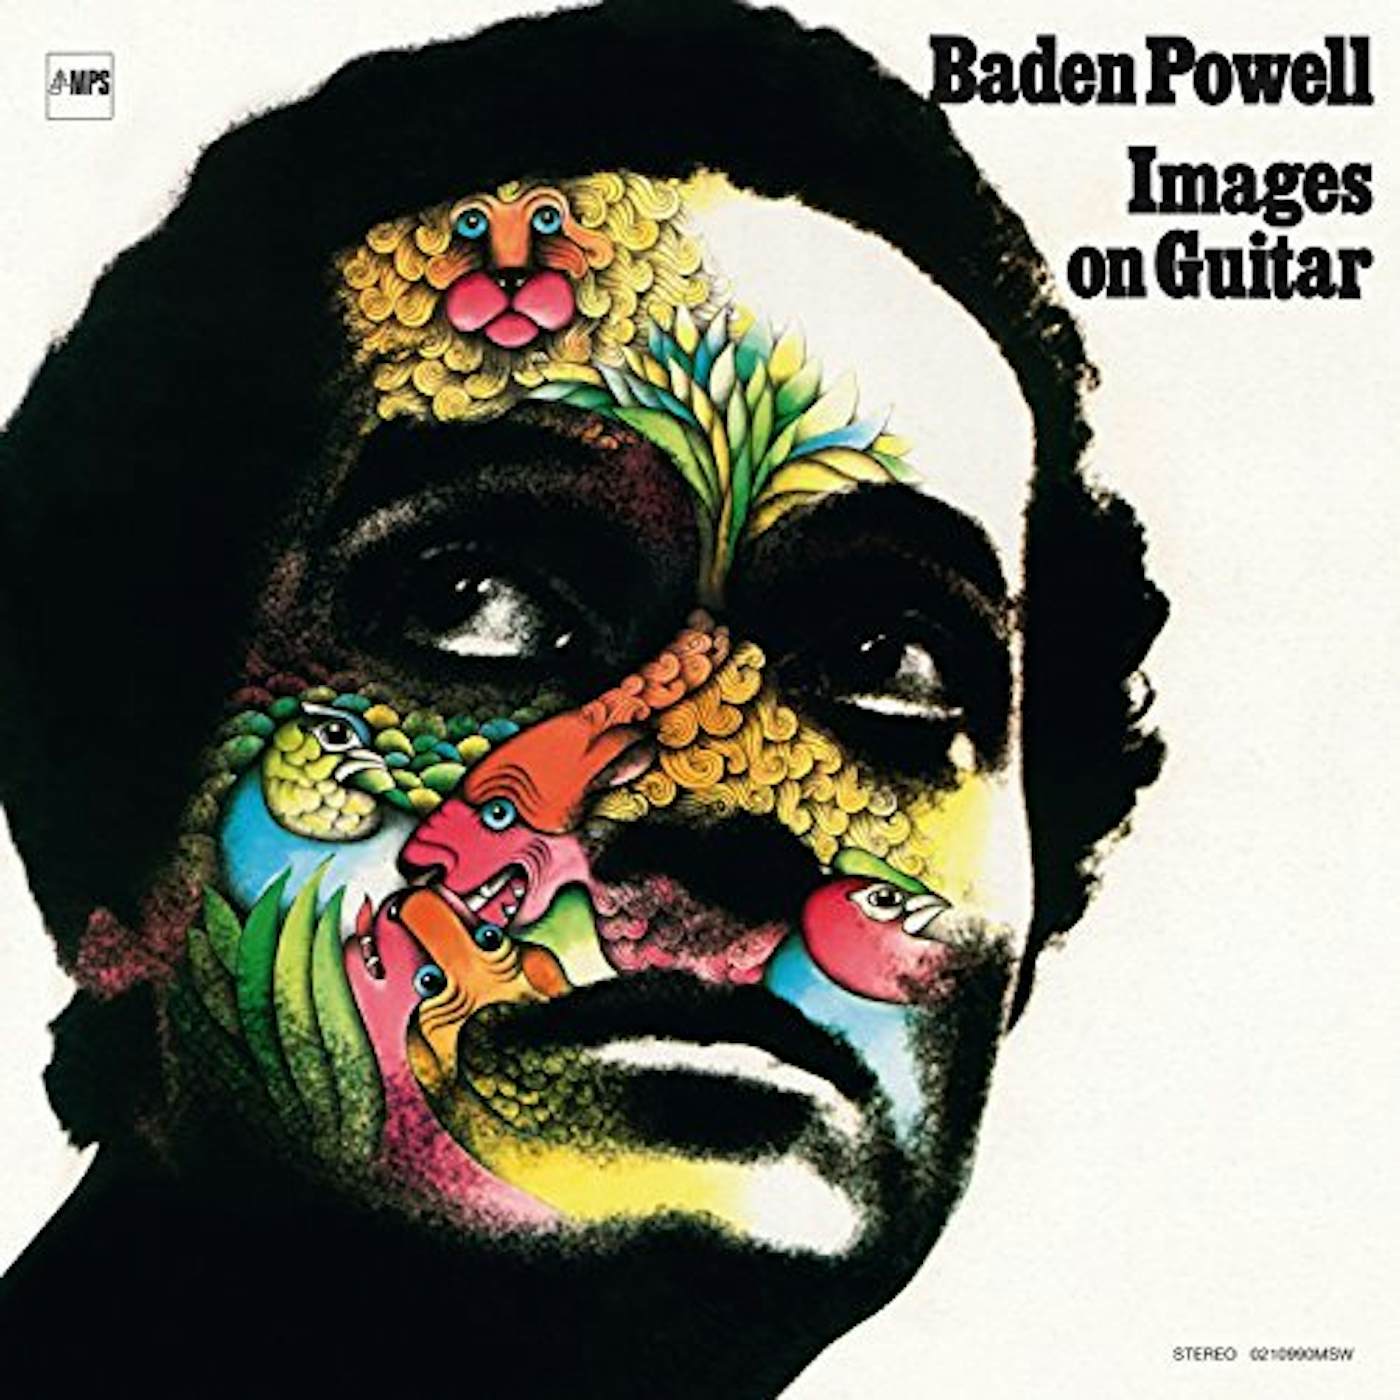 Baden Powell Images On Guitar Vinyl Record